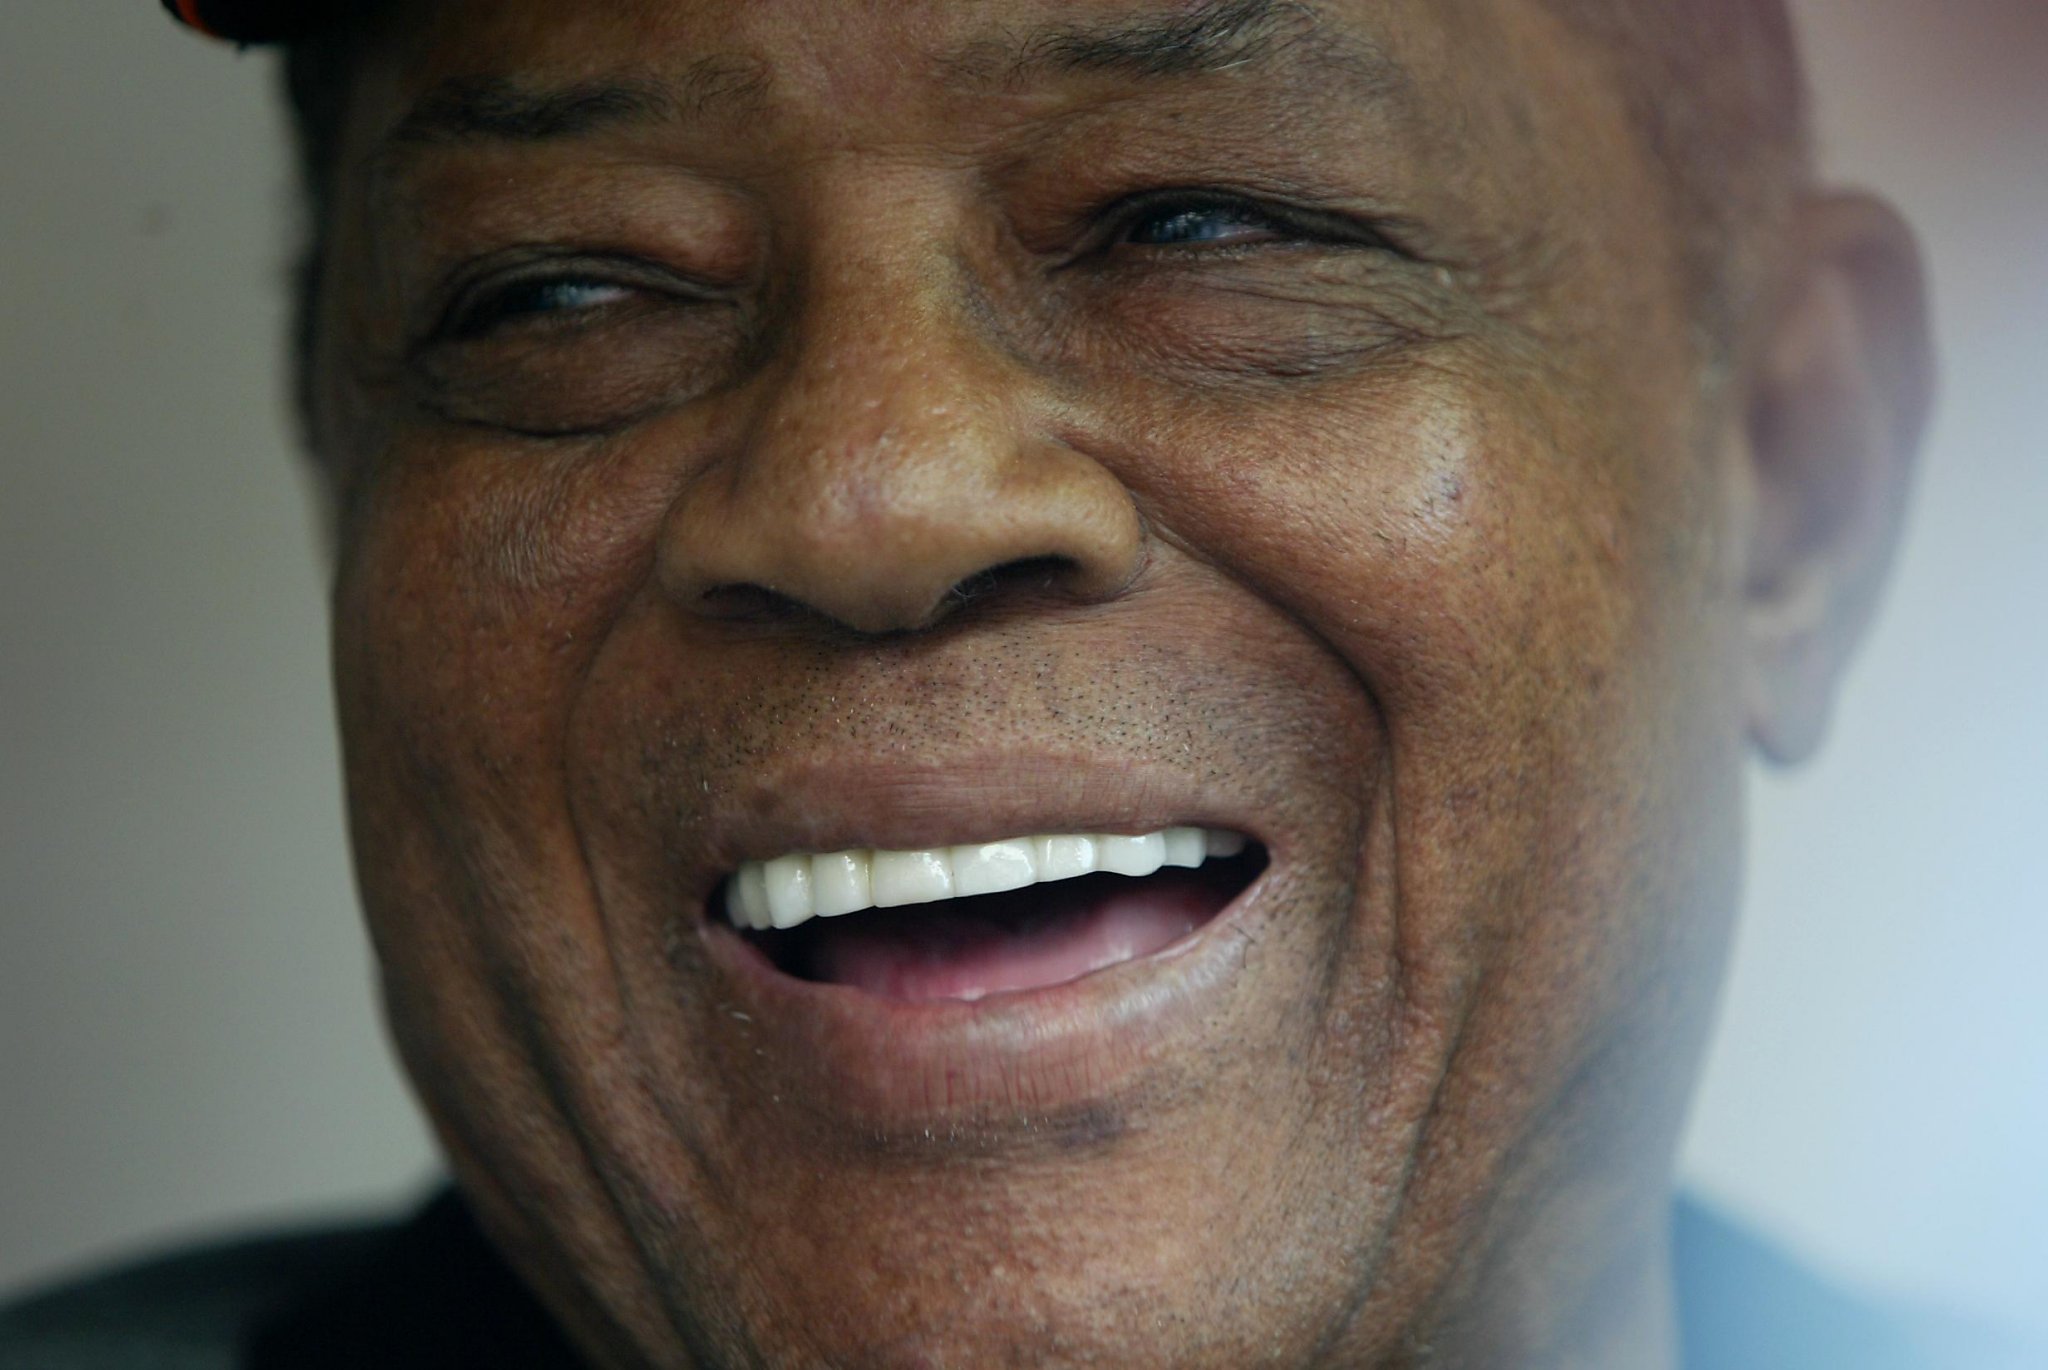 Willie Mays Turns 90 - The New York Times